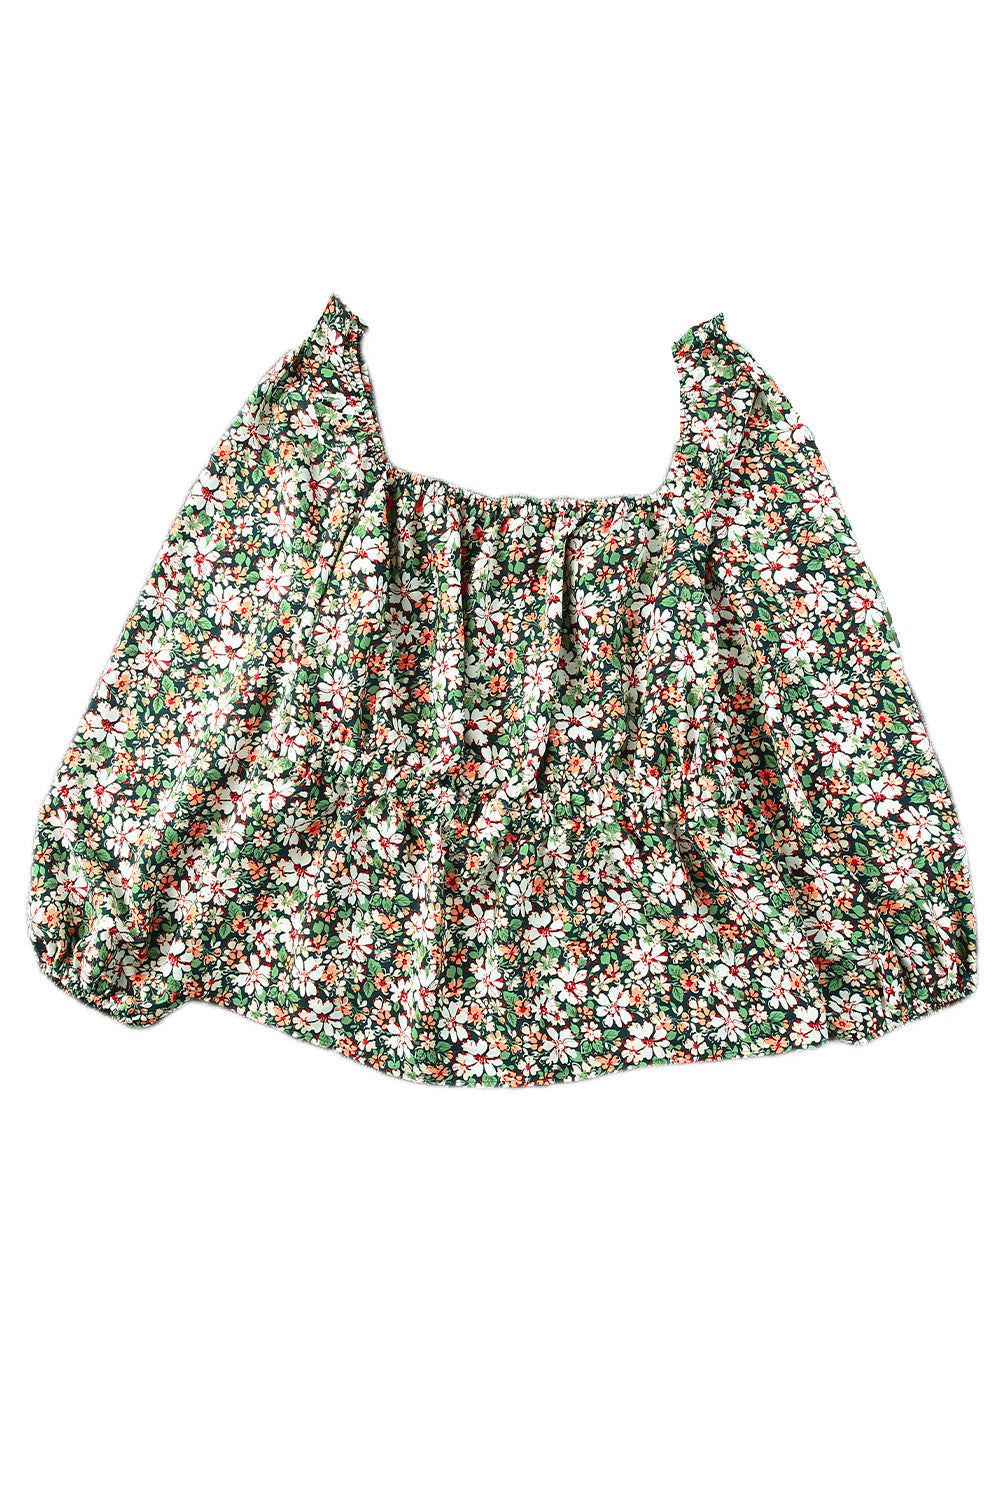 Green Square Neck Floral Plus Size Peplum Top